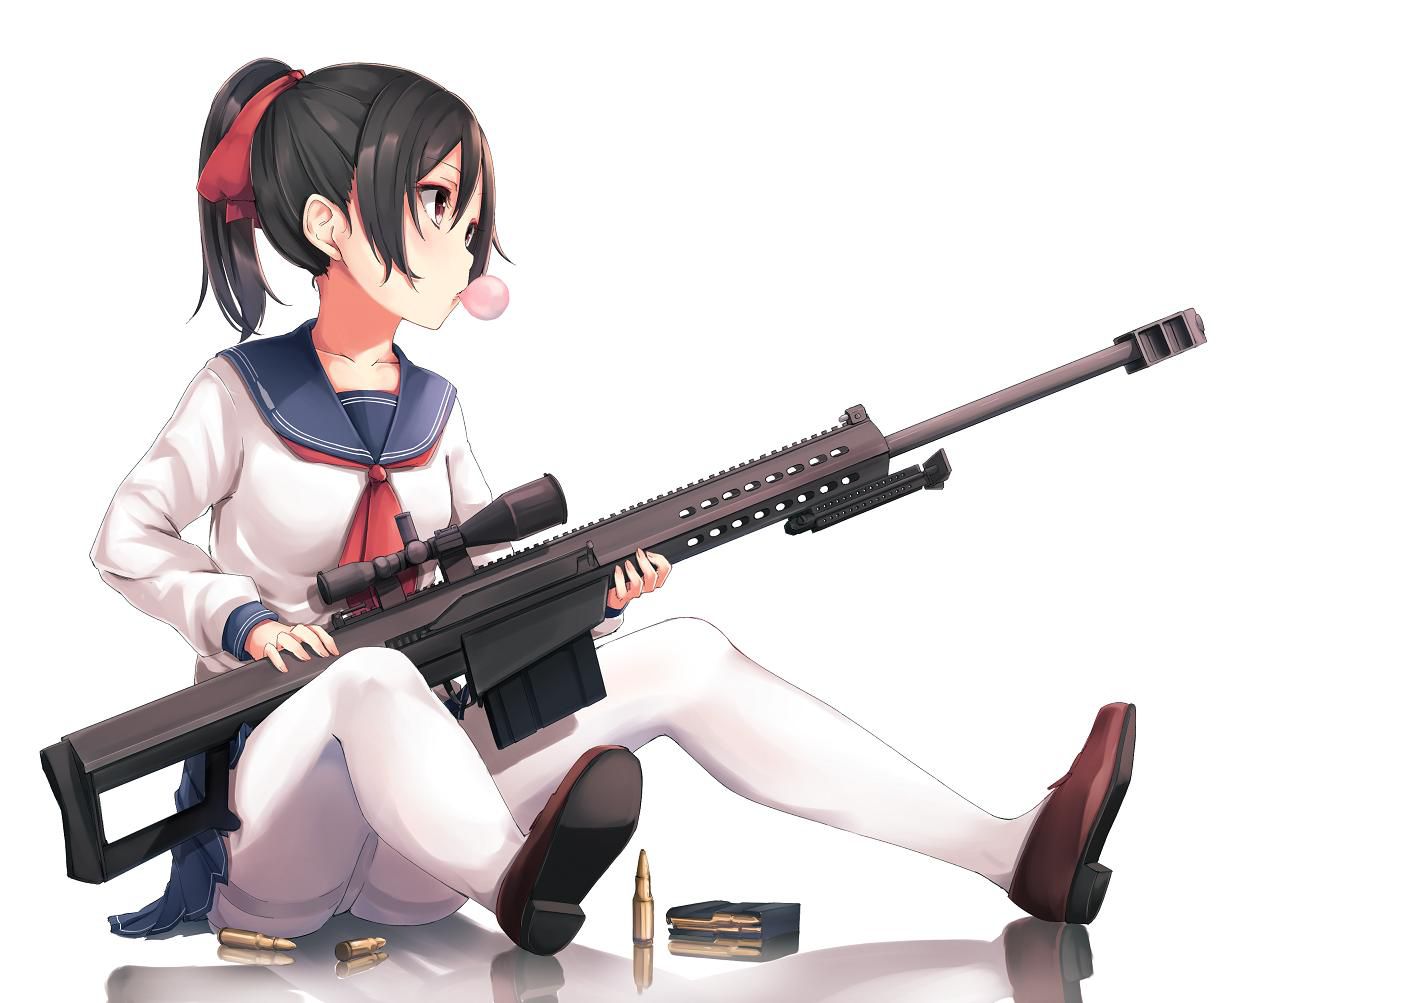 Secondary image of a pretty girl with a firearm, etc. 4 [non-erotic] 26